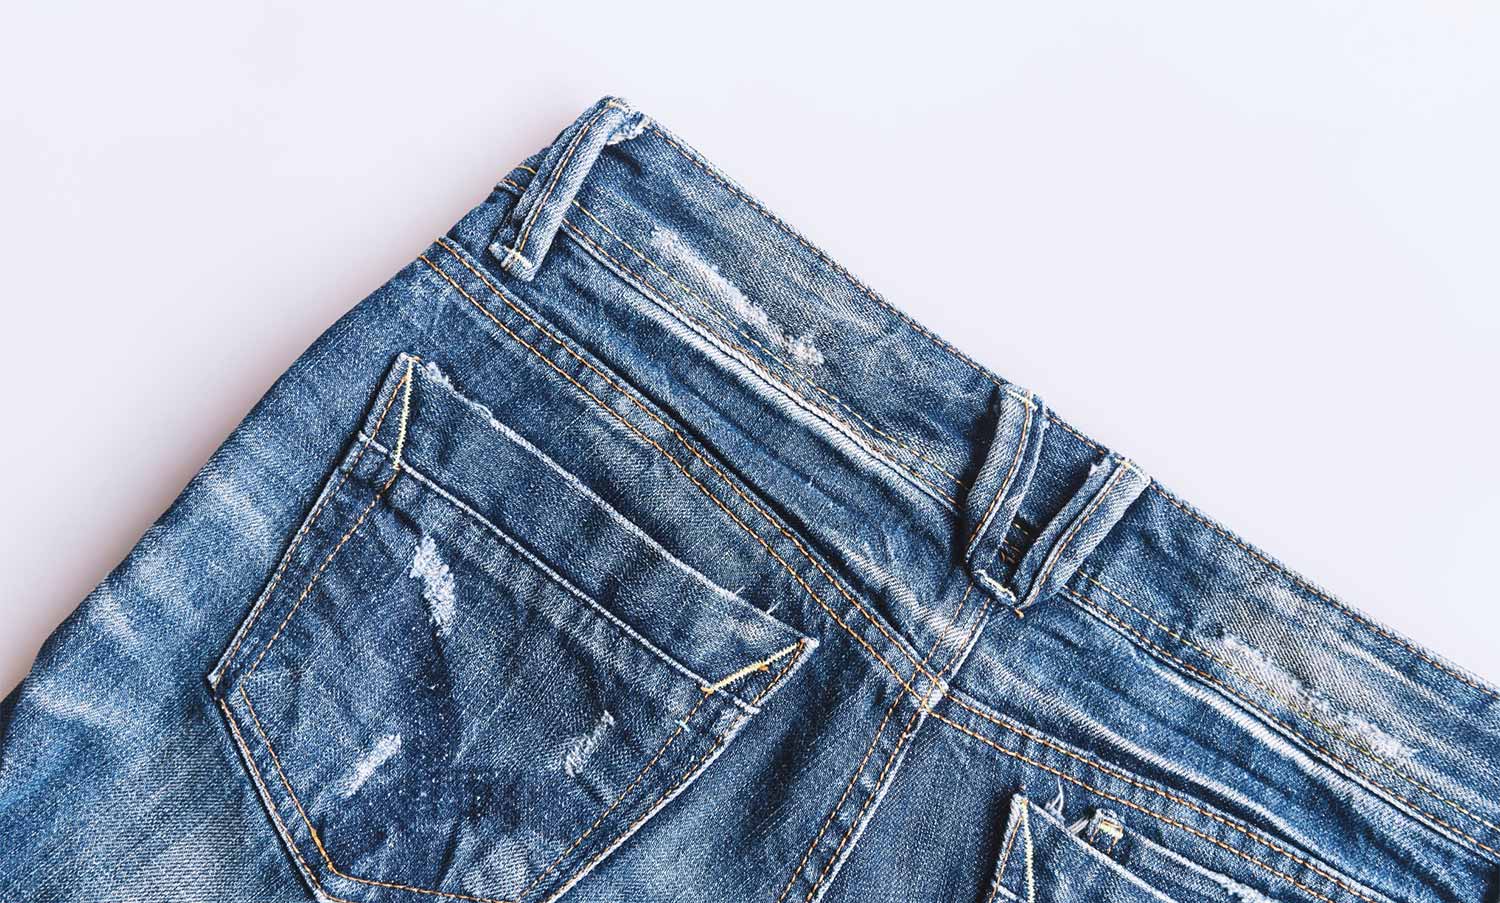 wash jeans with other clothes